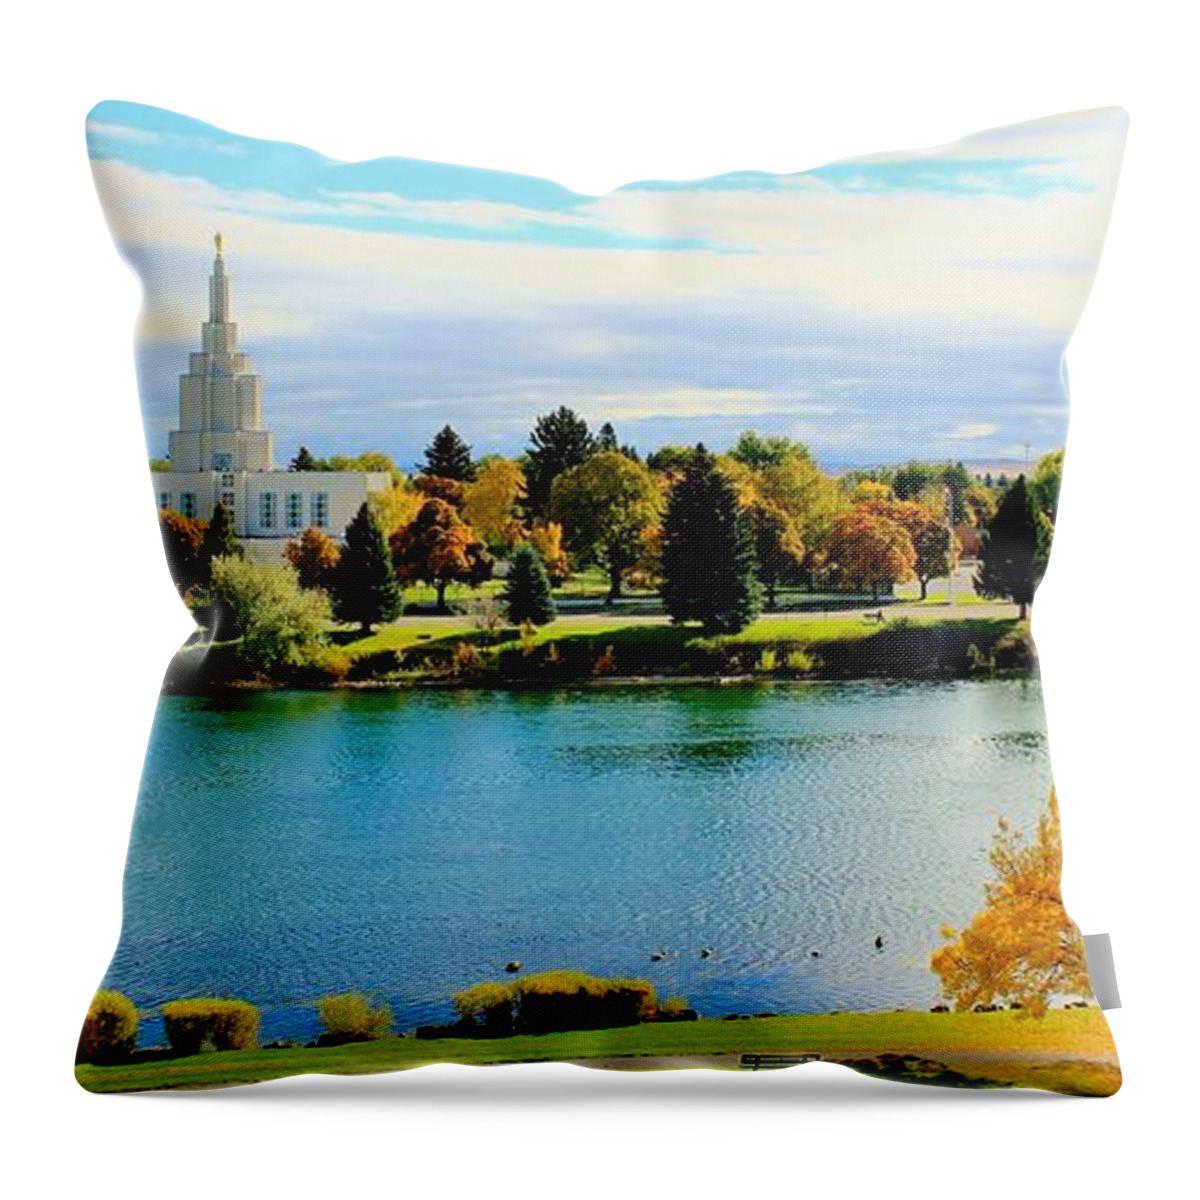 Lds Throw Pillow featuring the photograph Idaho Falls Temple by Benjamin Yeager